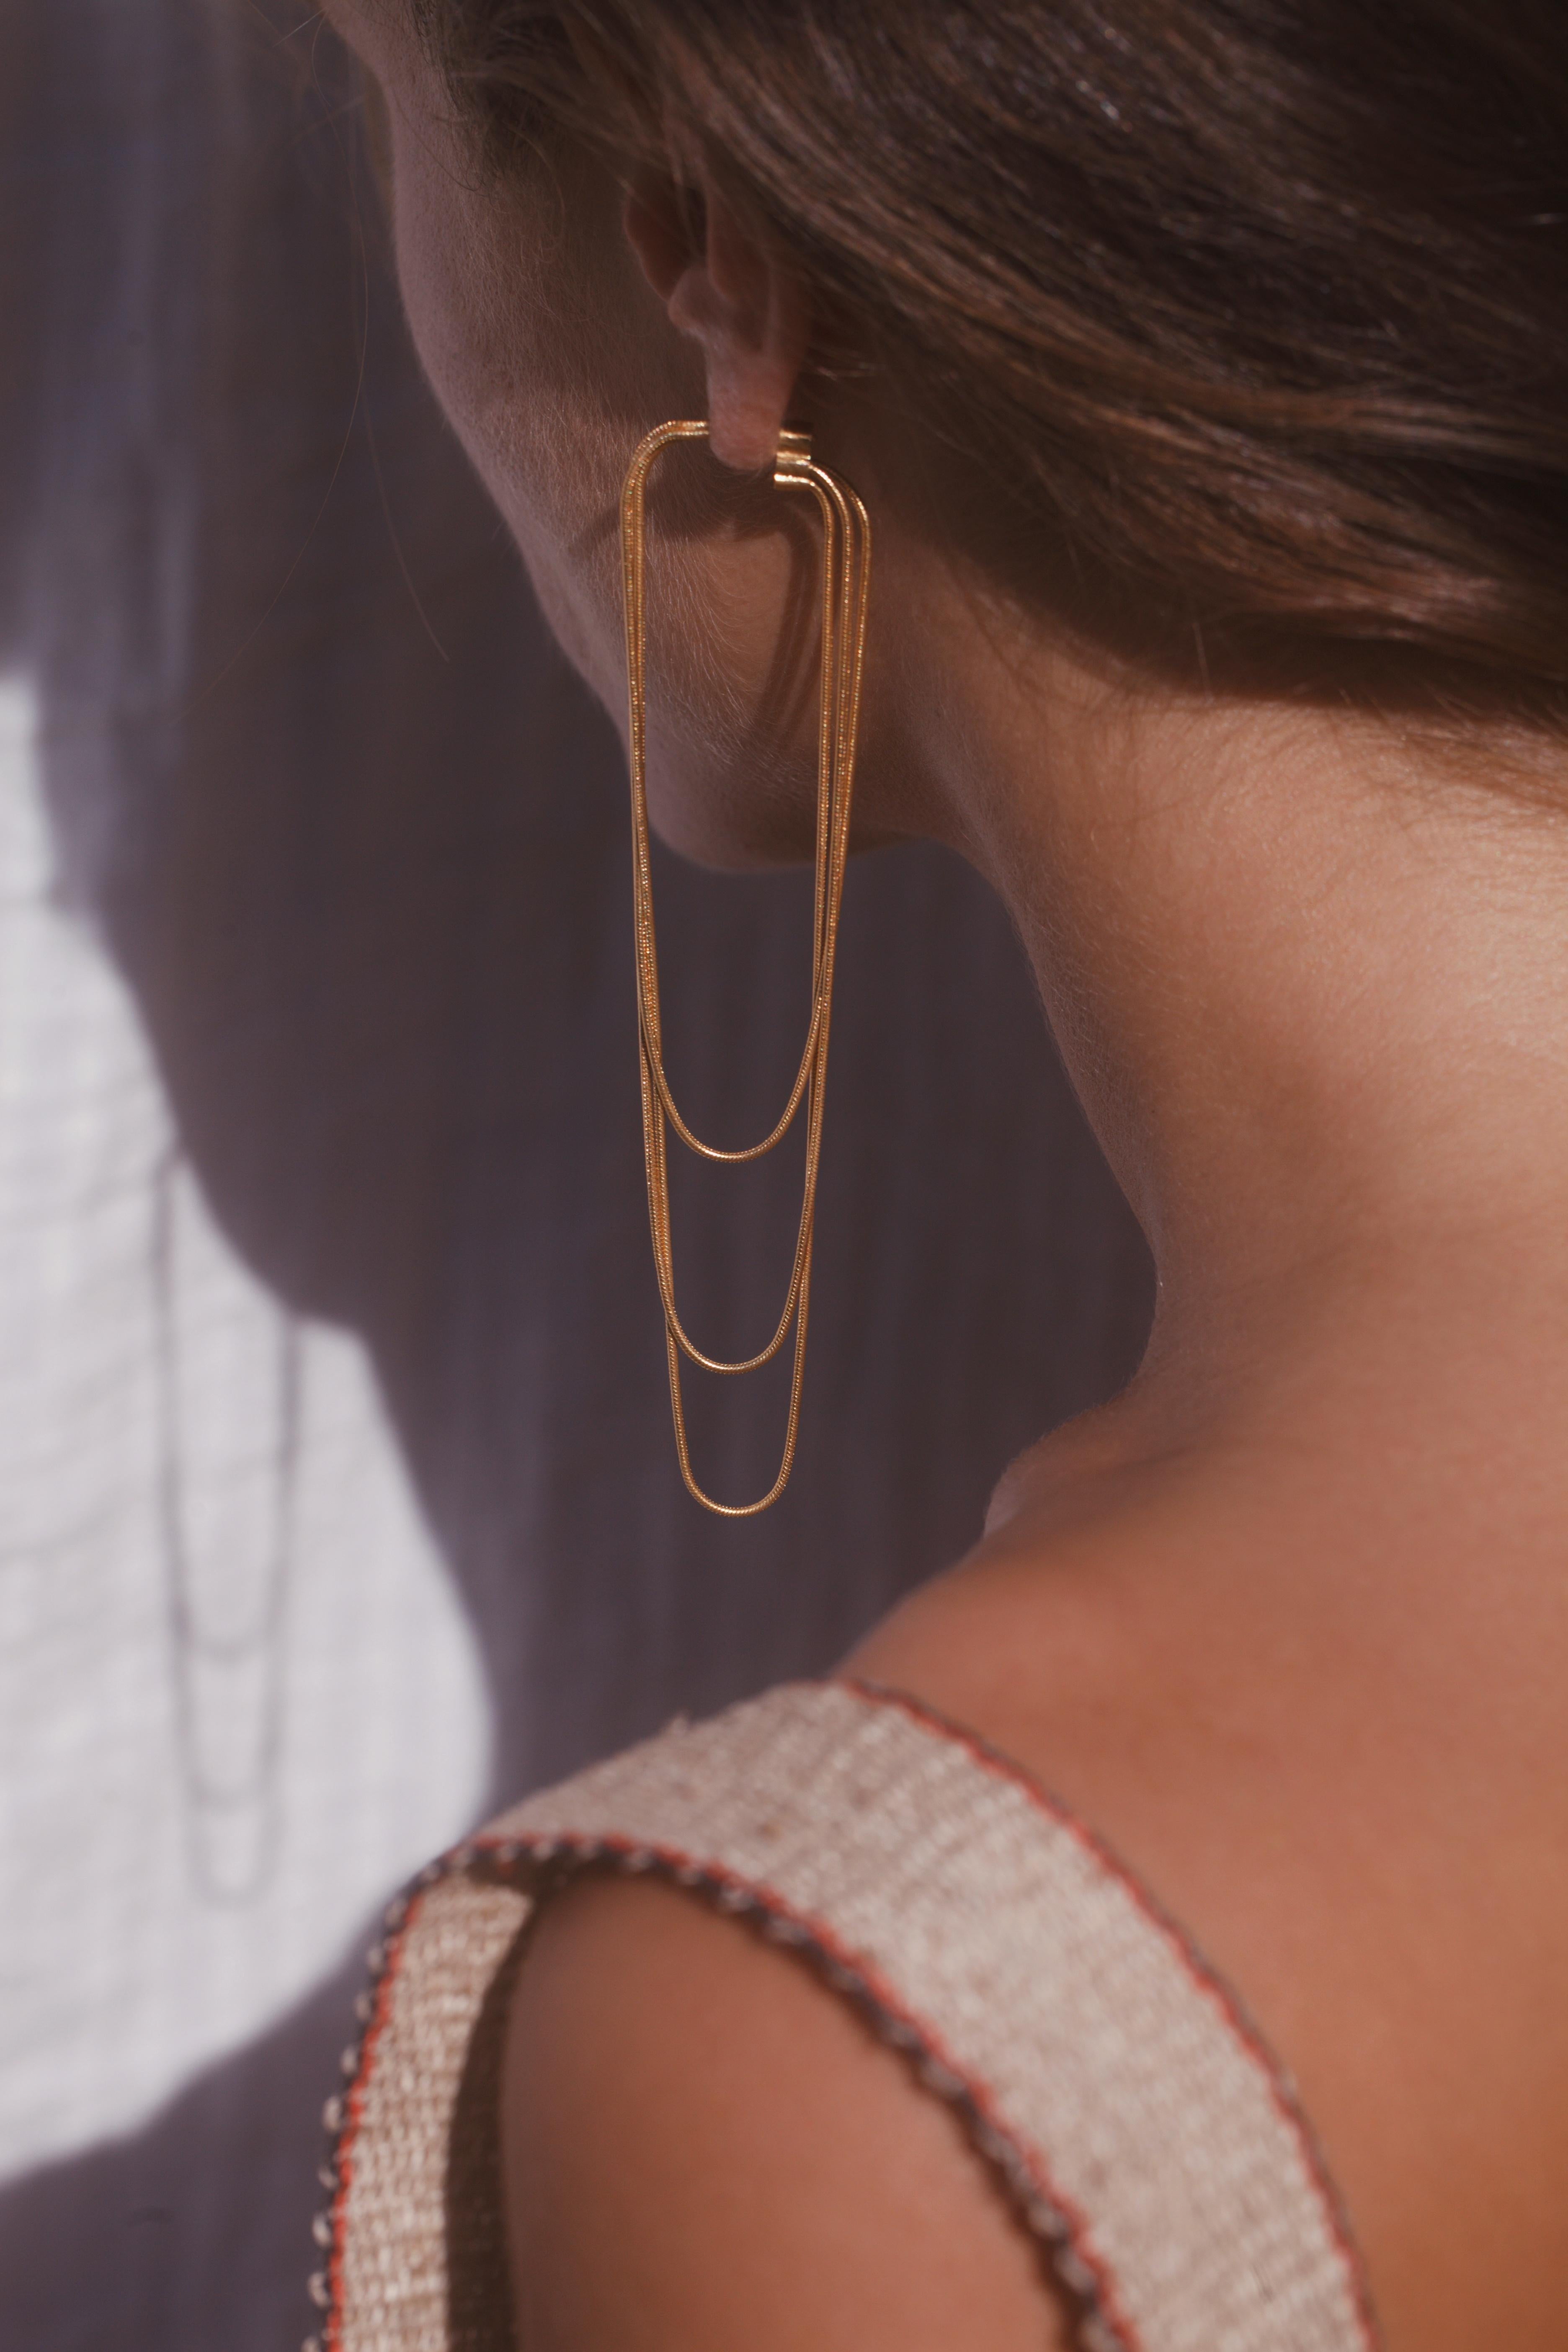 18 carat-gold plated silver earrings that offer a feminime and modern look.  The movement of the snake chain adds a strong liquid effect that compliments your style. 

All of our earrings have 10 K posts to avoid allergies.

This design is part of